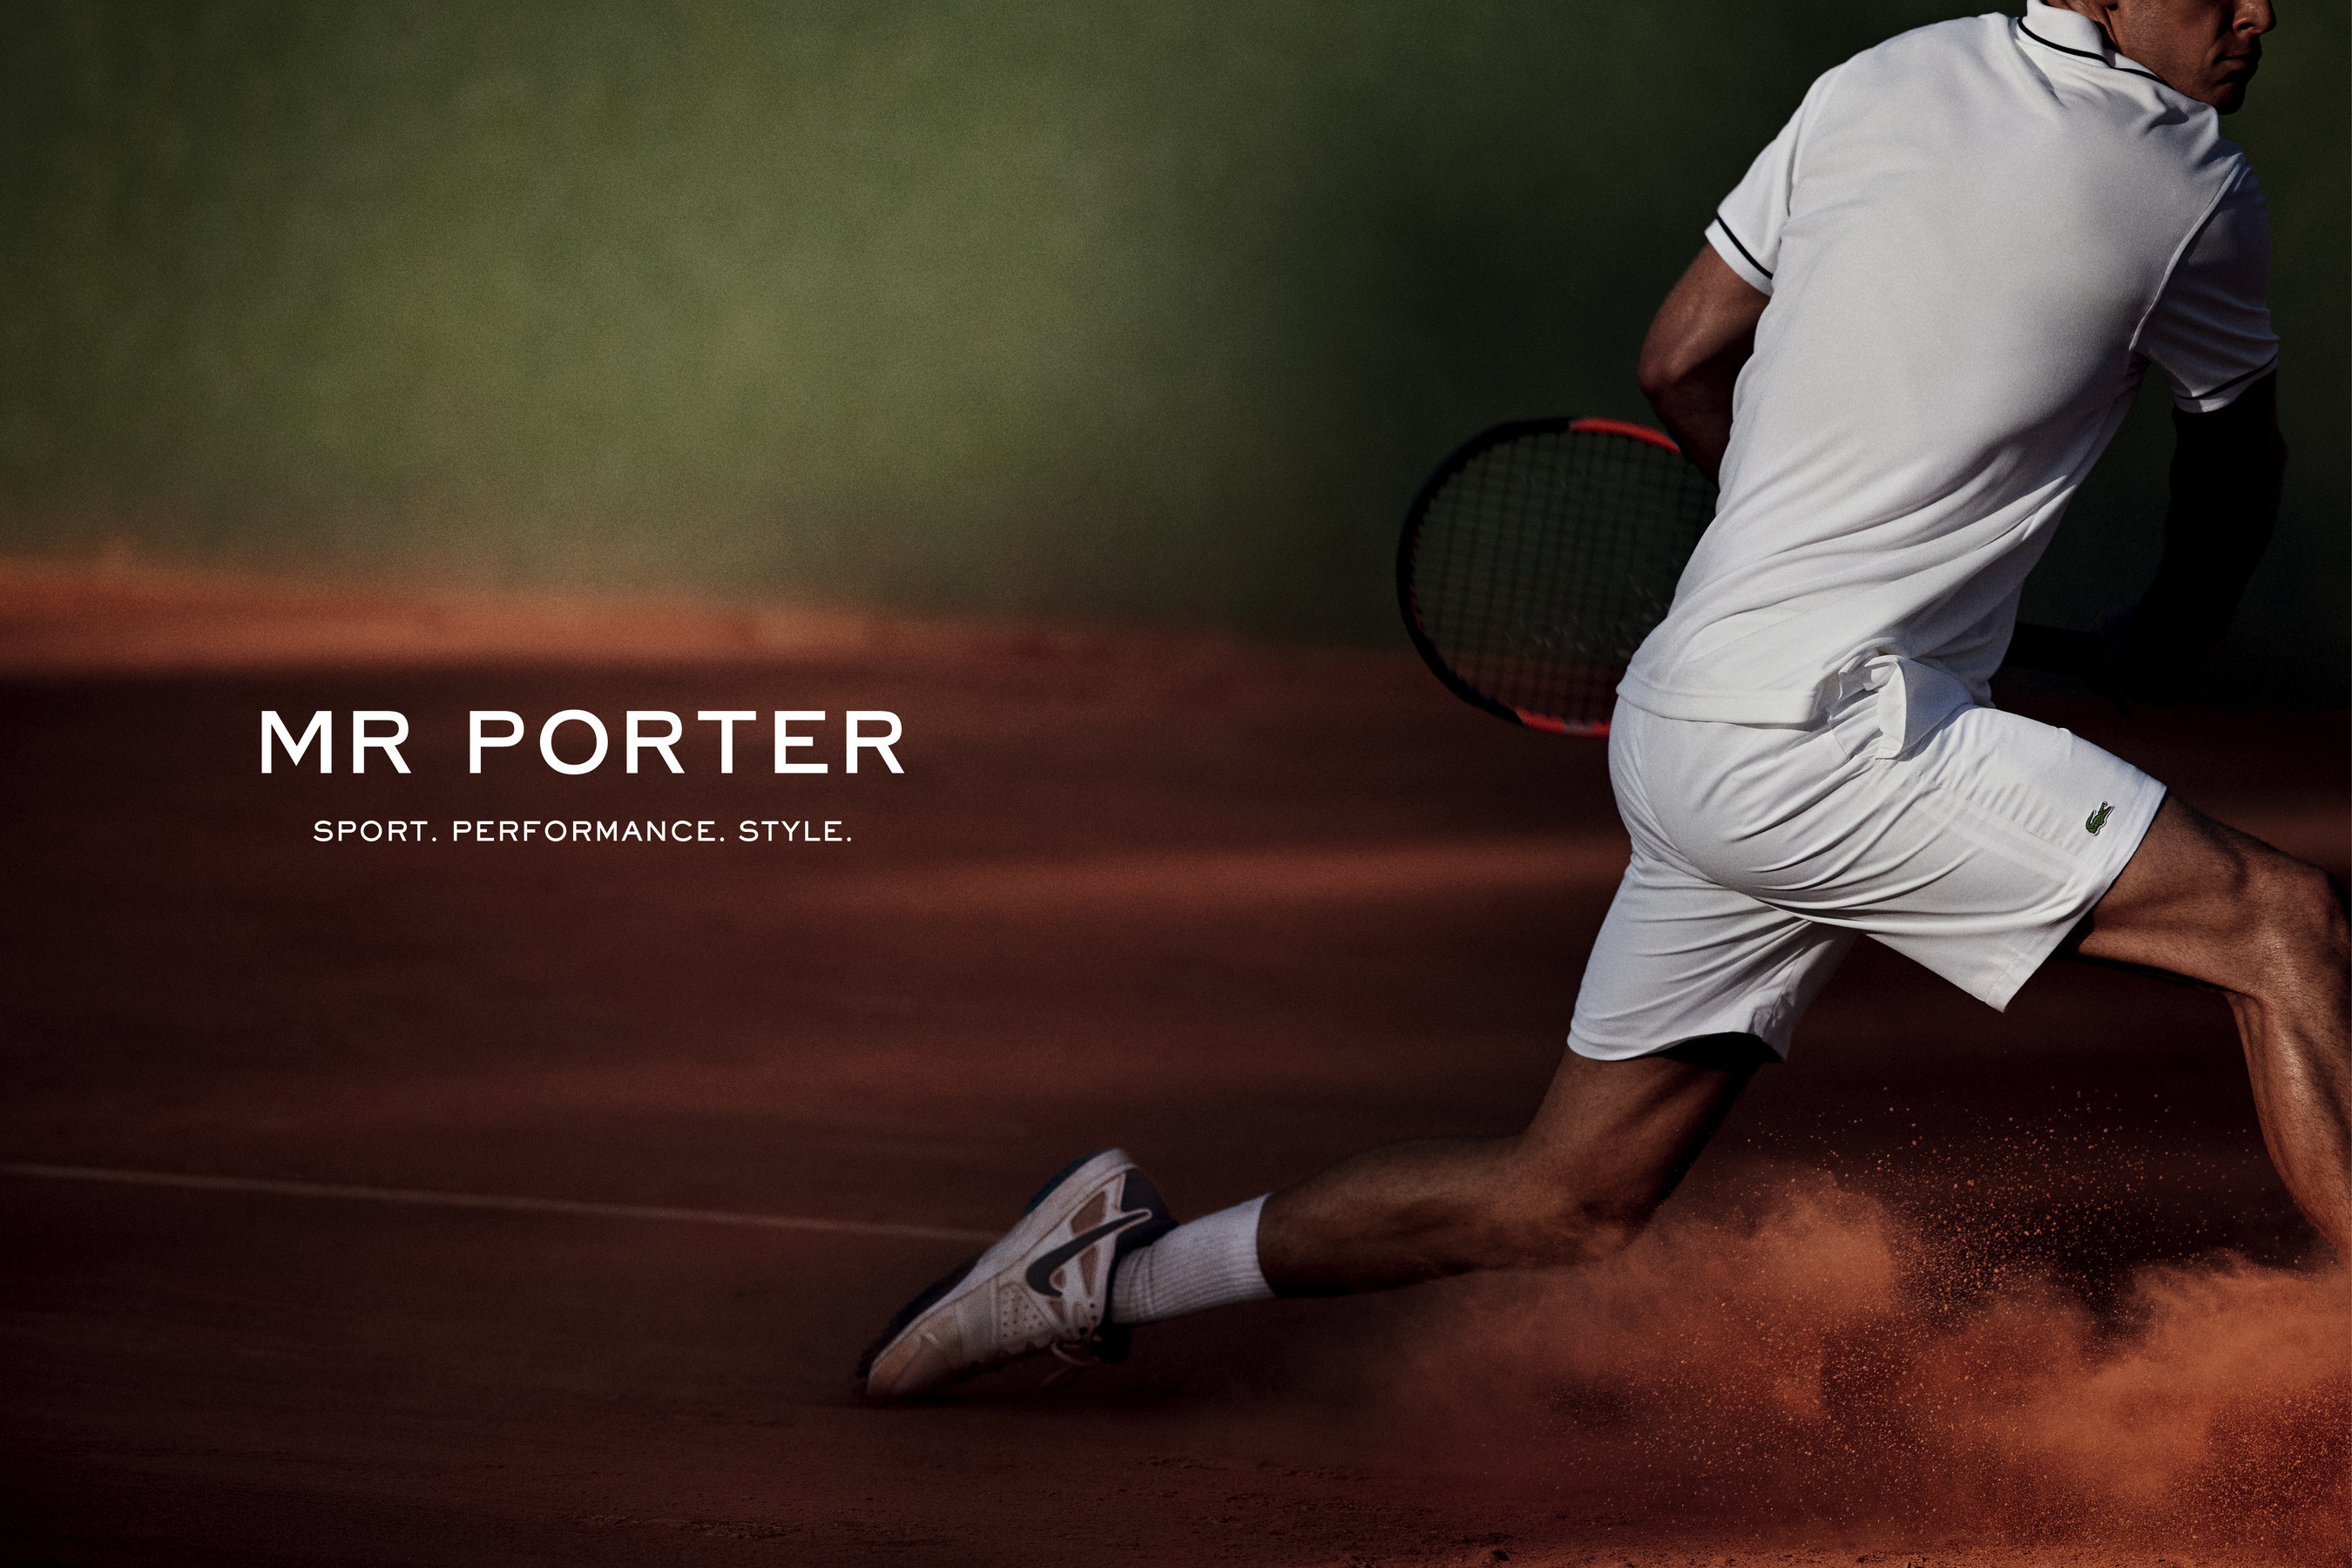 MRPORTER.COM, the award-winning global retail destination for men's style, will launch a new athletic and performance category titled MR PORTER SPORT on 28 April 2015